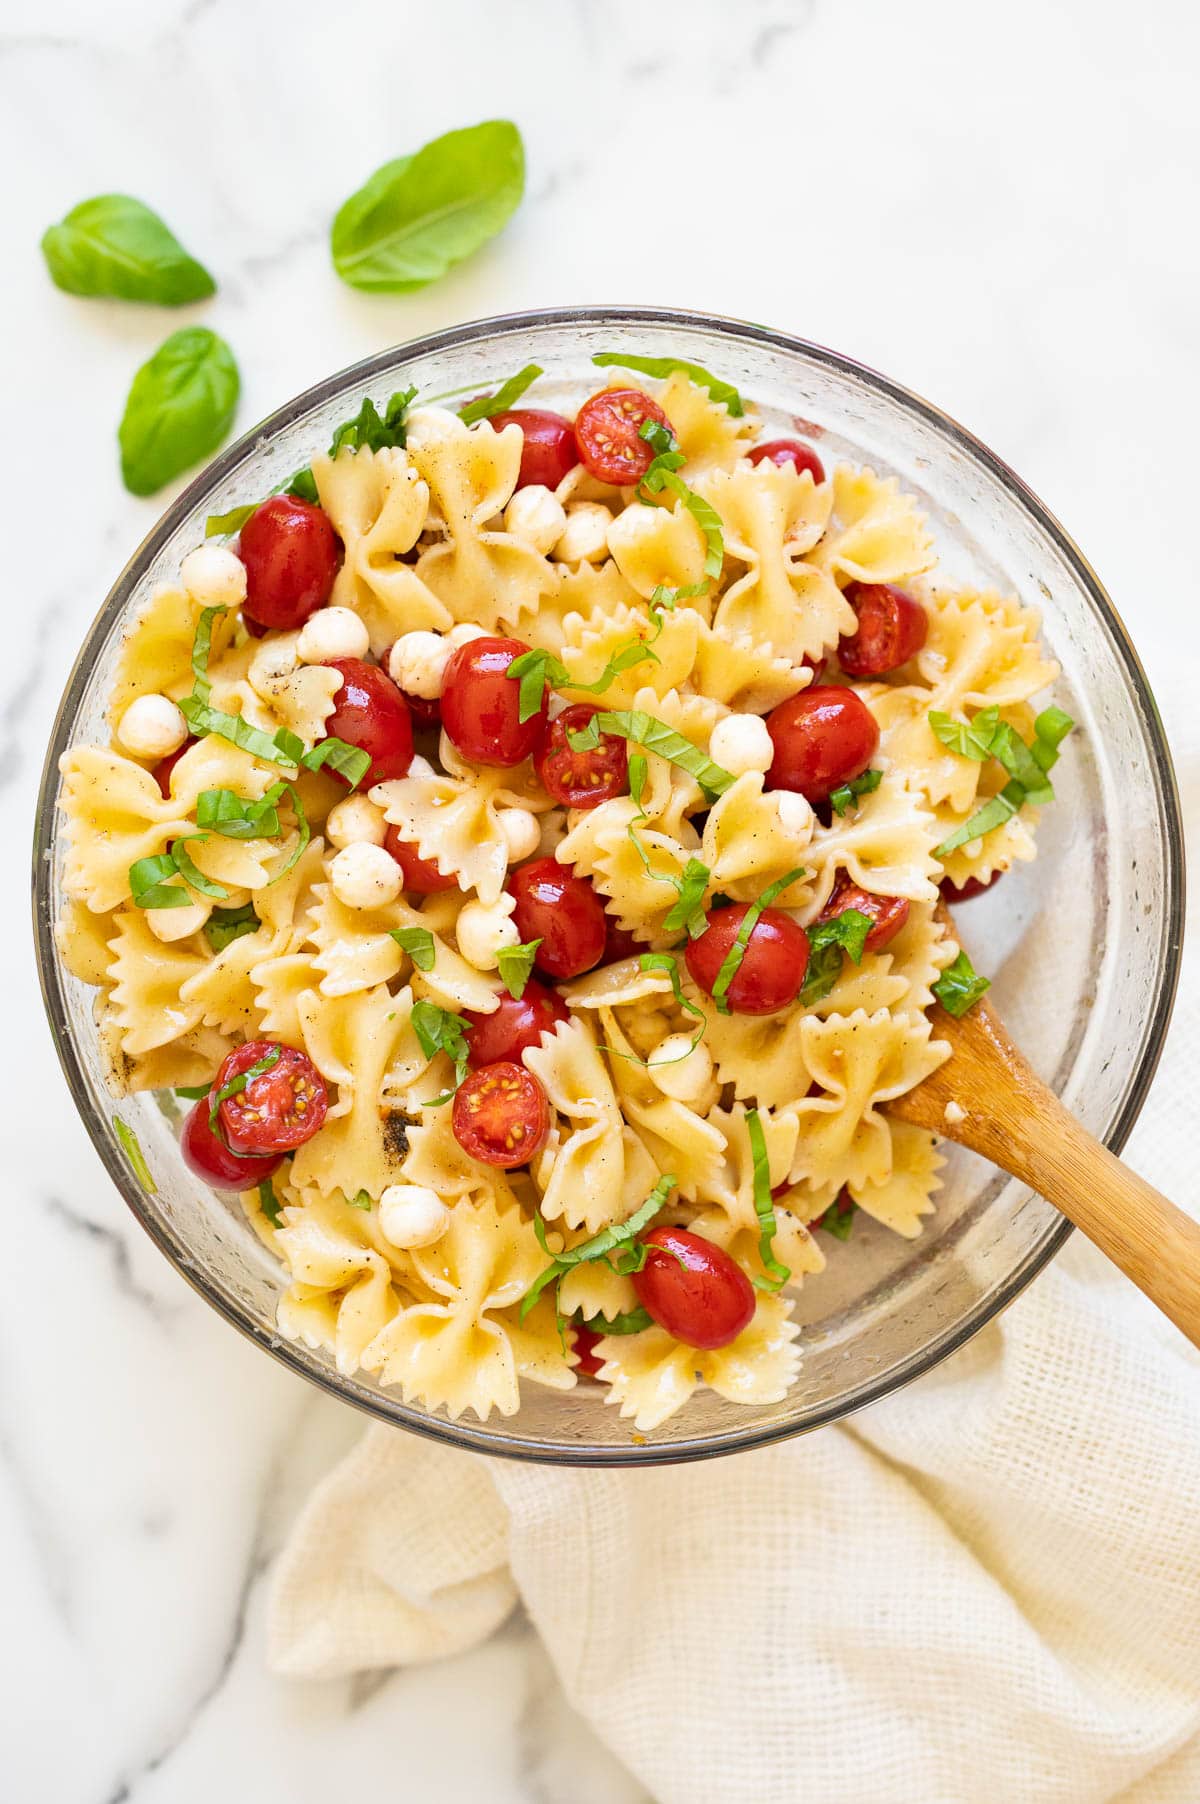 Caprese pasta salad garnished with fresh basil in a glass bowl with wooden spoon.